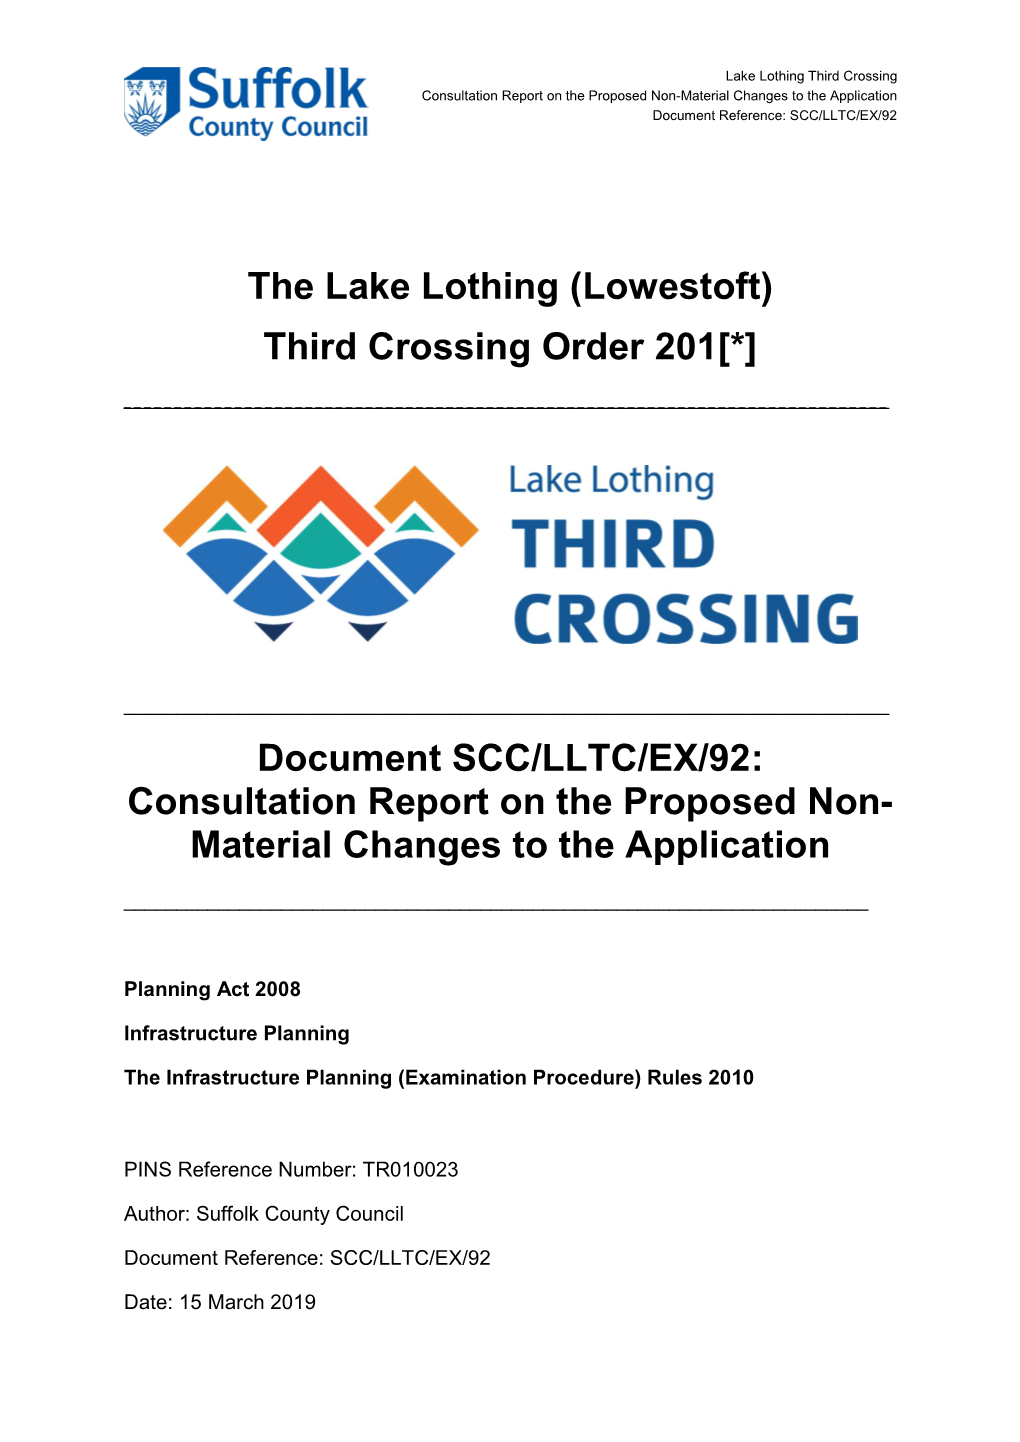 The Lake Lothing (Lowestoft) Third Crossing Order 201[*] Document